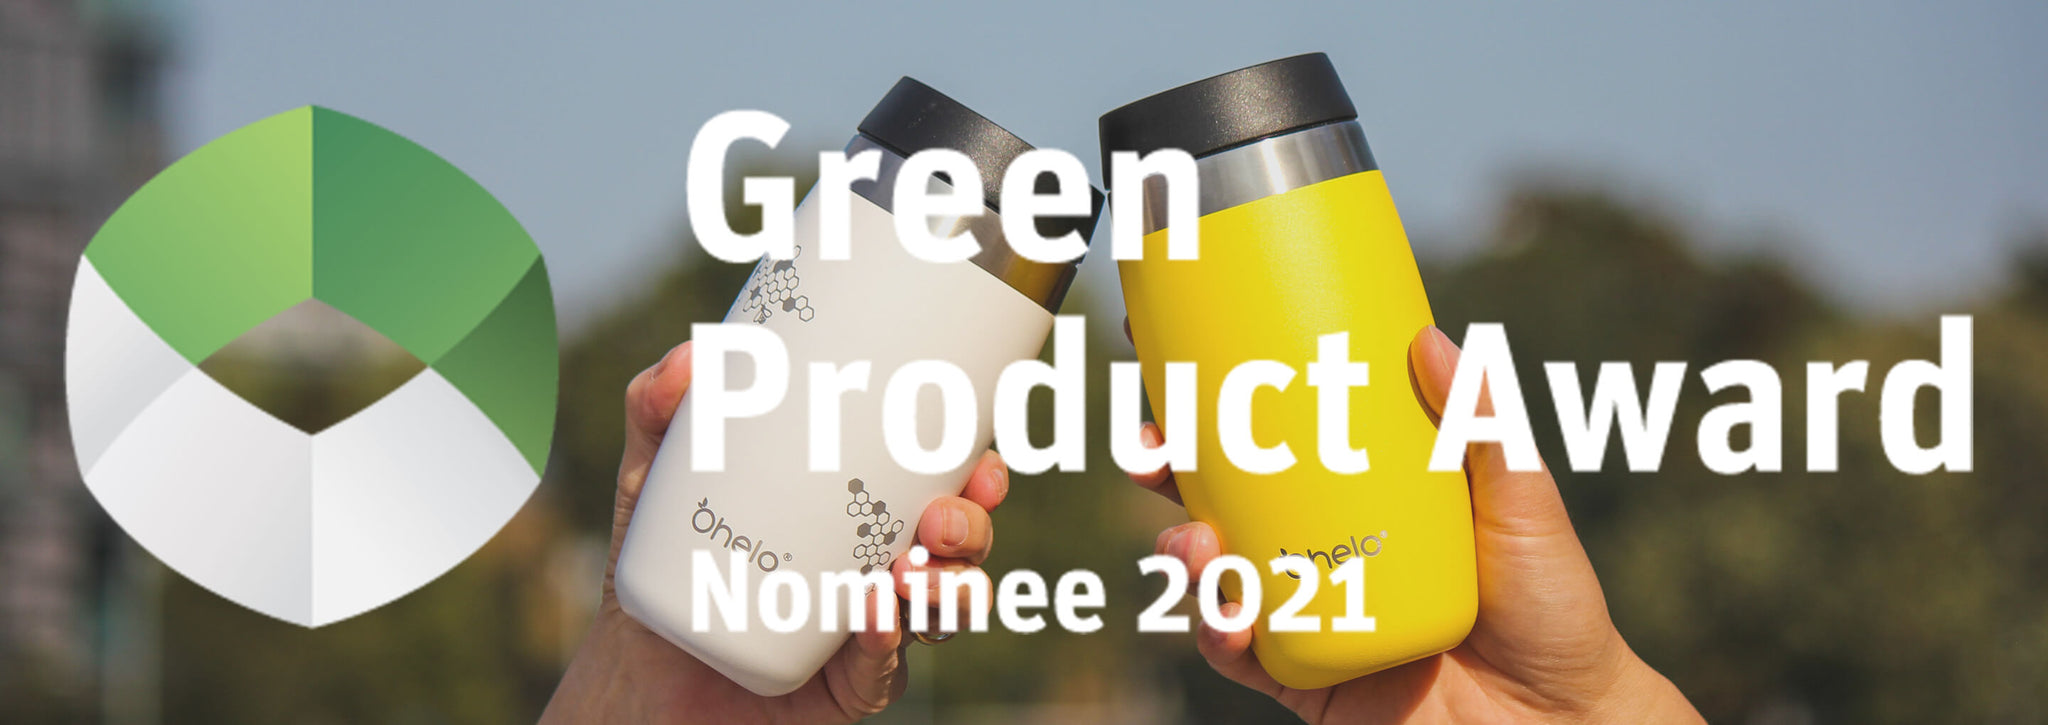 Green Product Award 2021 - a win for our small business!